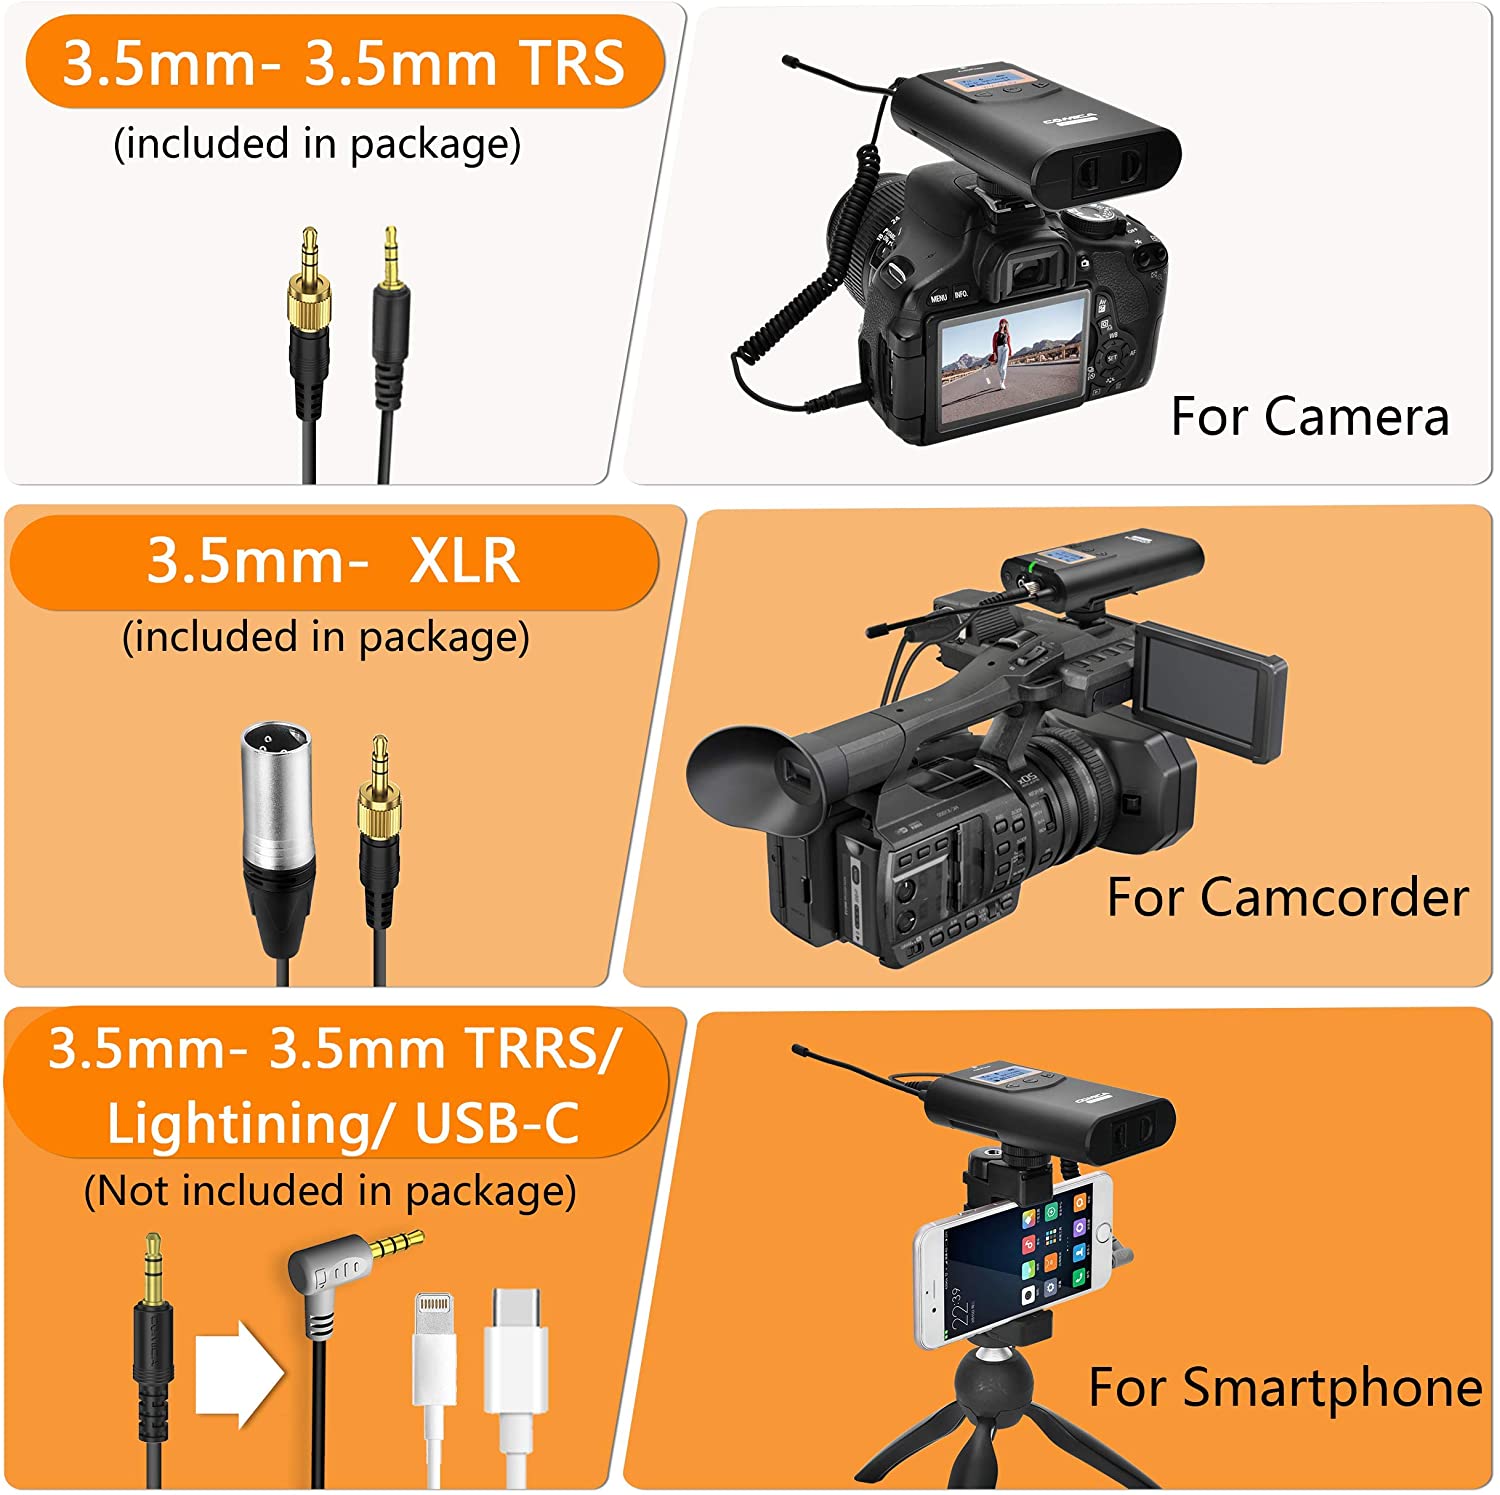 CVM-WM100 UHF 48 Channels Wireless Lavalier Microphone Lapel Mic for DSLR Cameras Smartphones Video Recording Interview